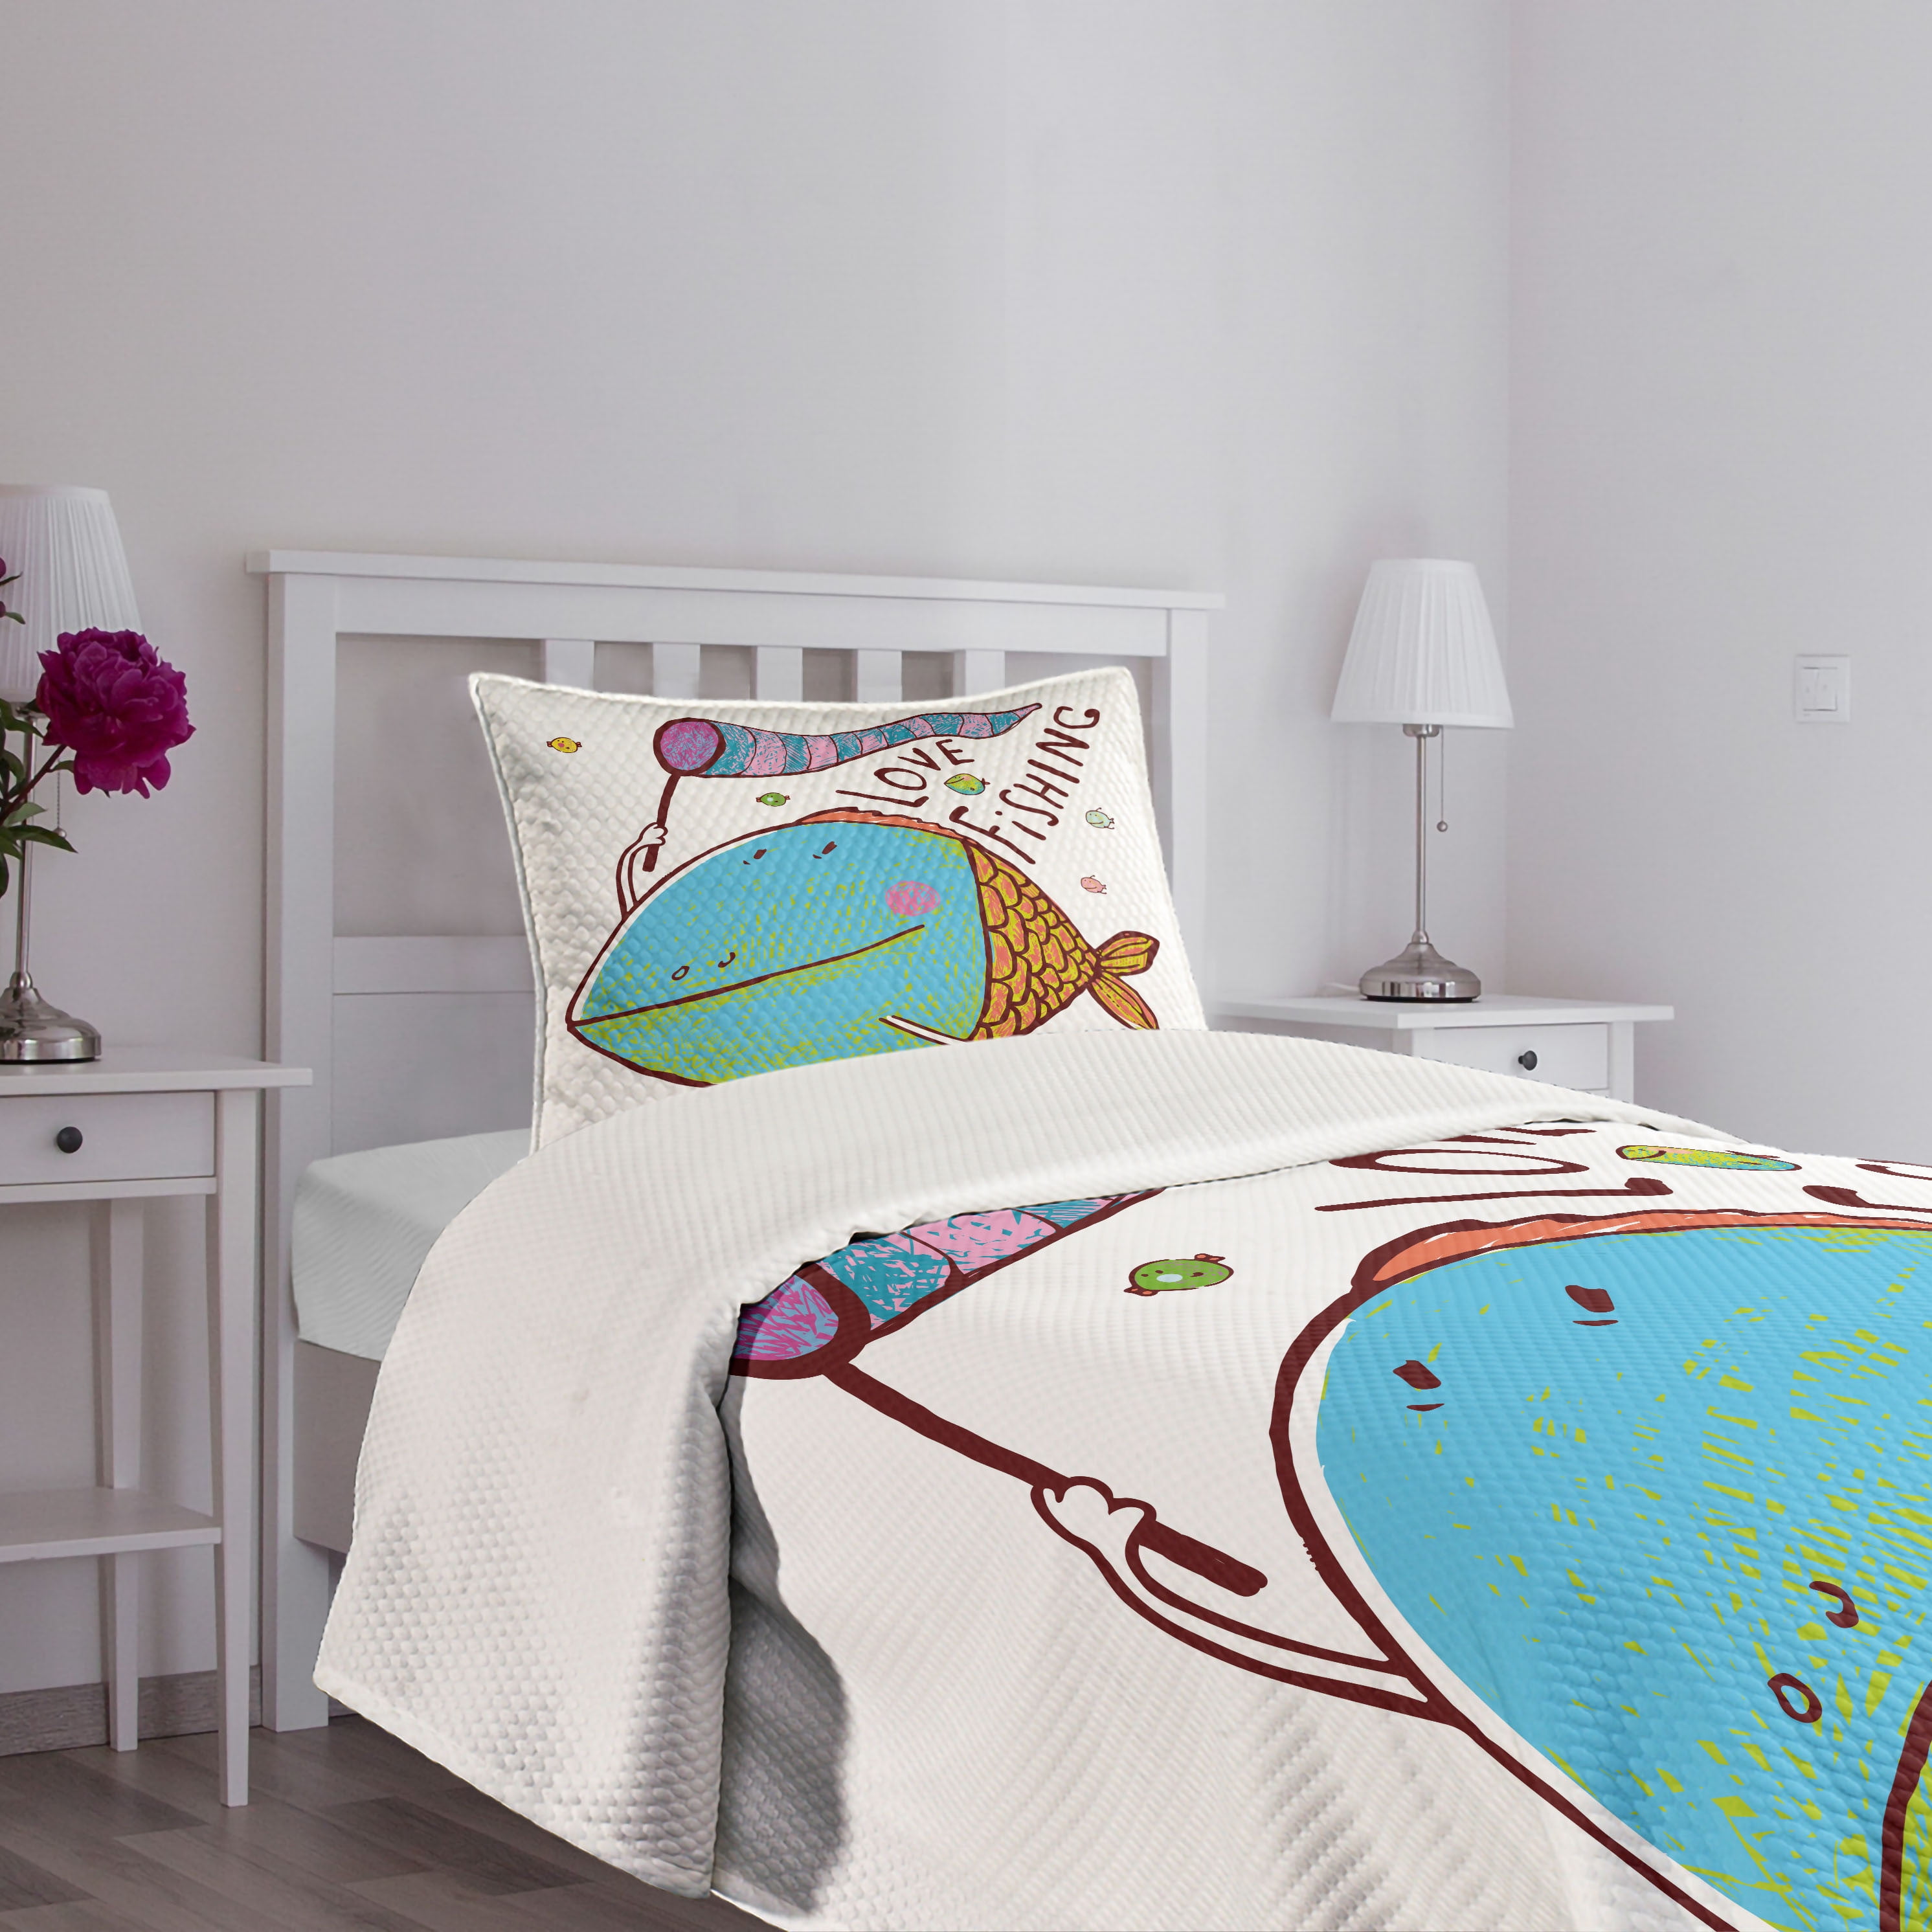 Fishing Bedspread Set Queen Size, Kids Cute Large Fat Fish Holding